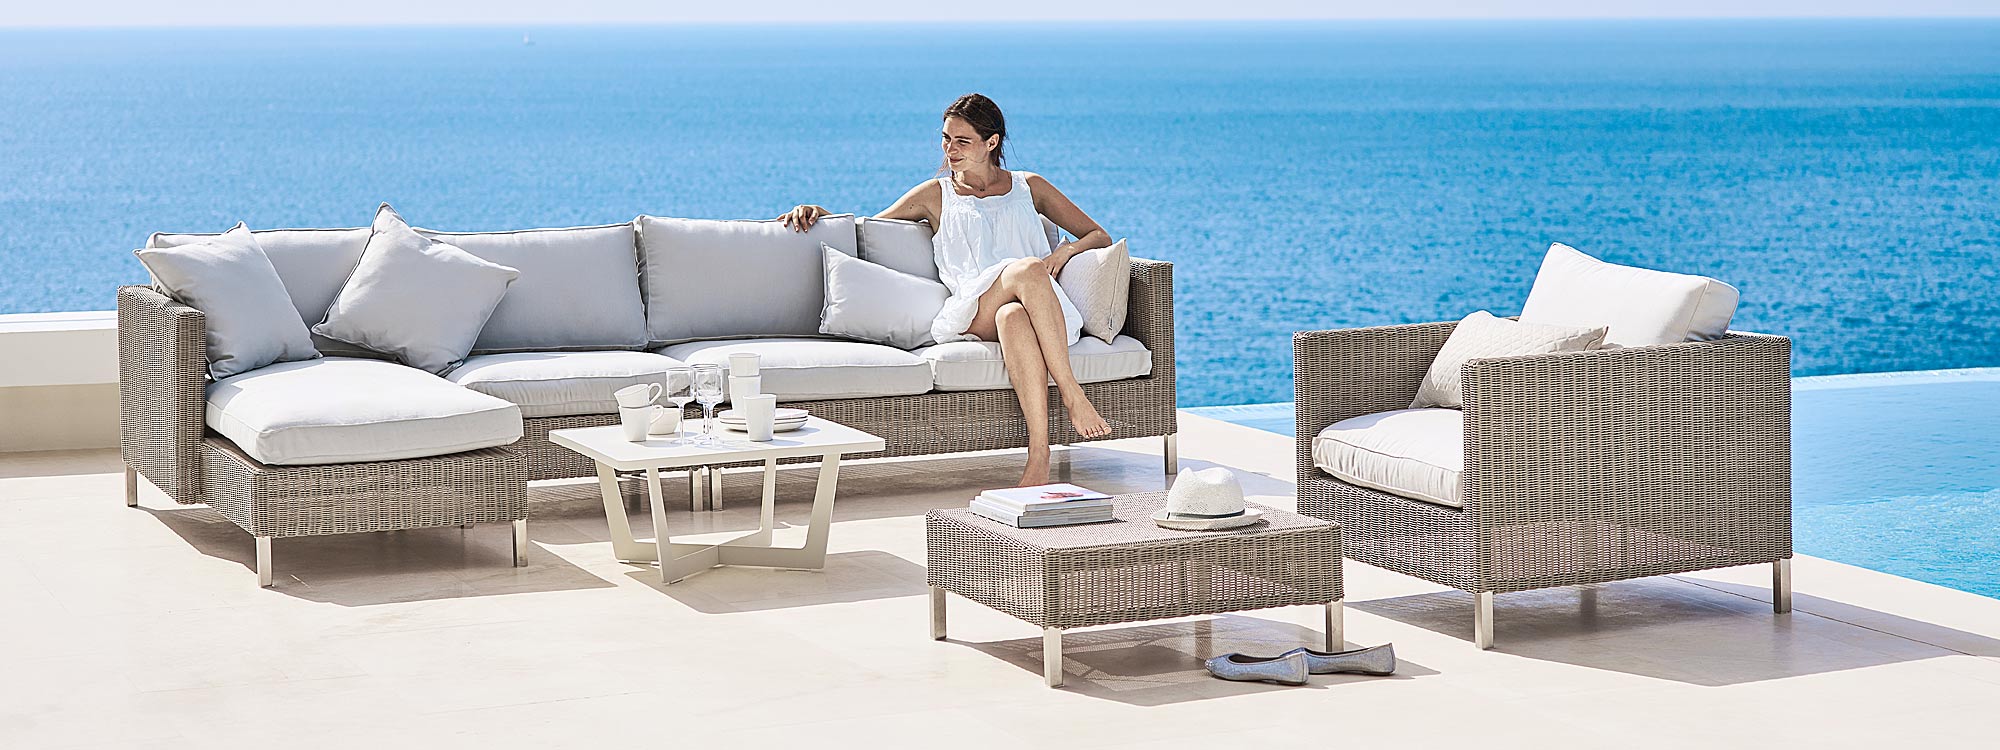 Image of woman sat on taupe Connect modular garden sofa by Cane-line, on sunny terrace with sea in background